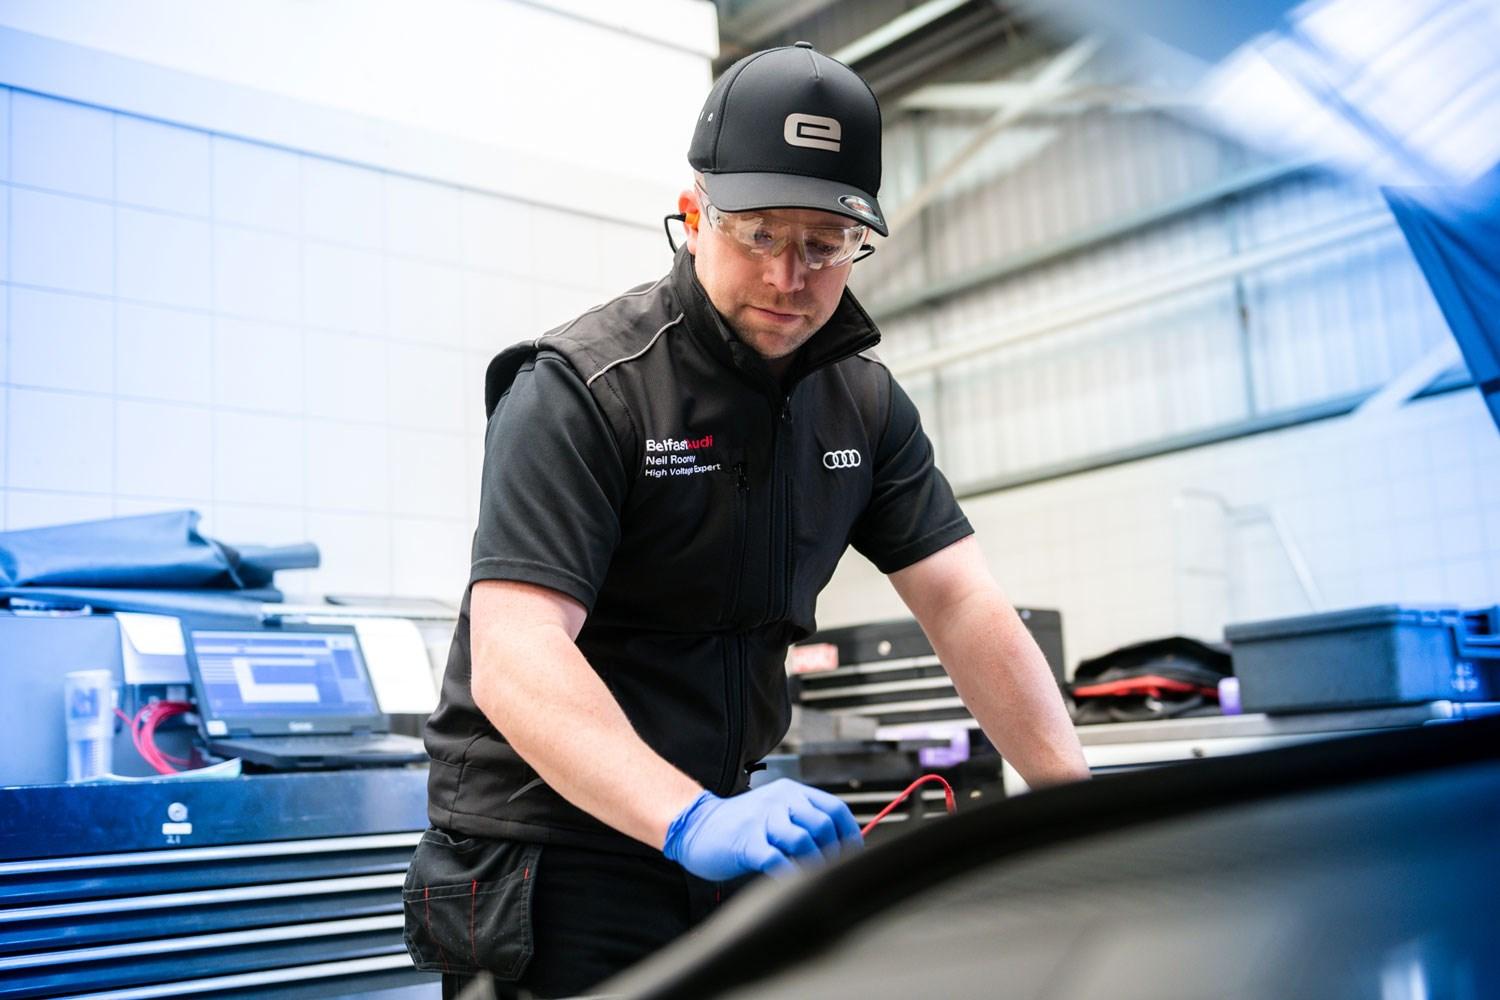 Audi Repair Specialist does cambelt replacement on Audi vehicle at Portadown Audi